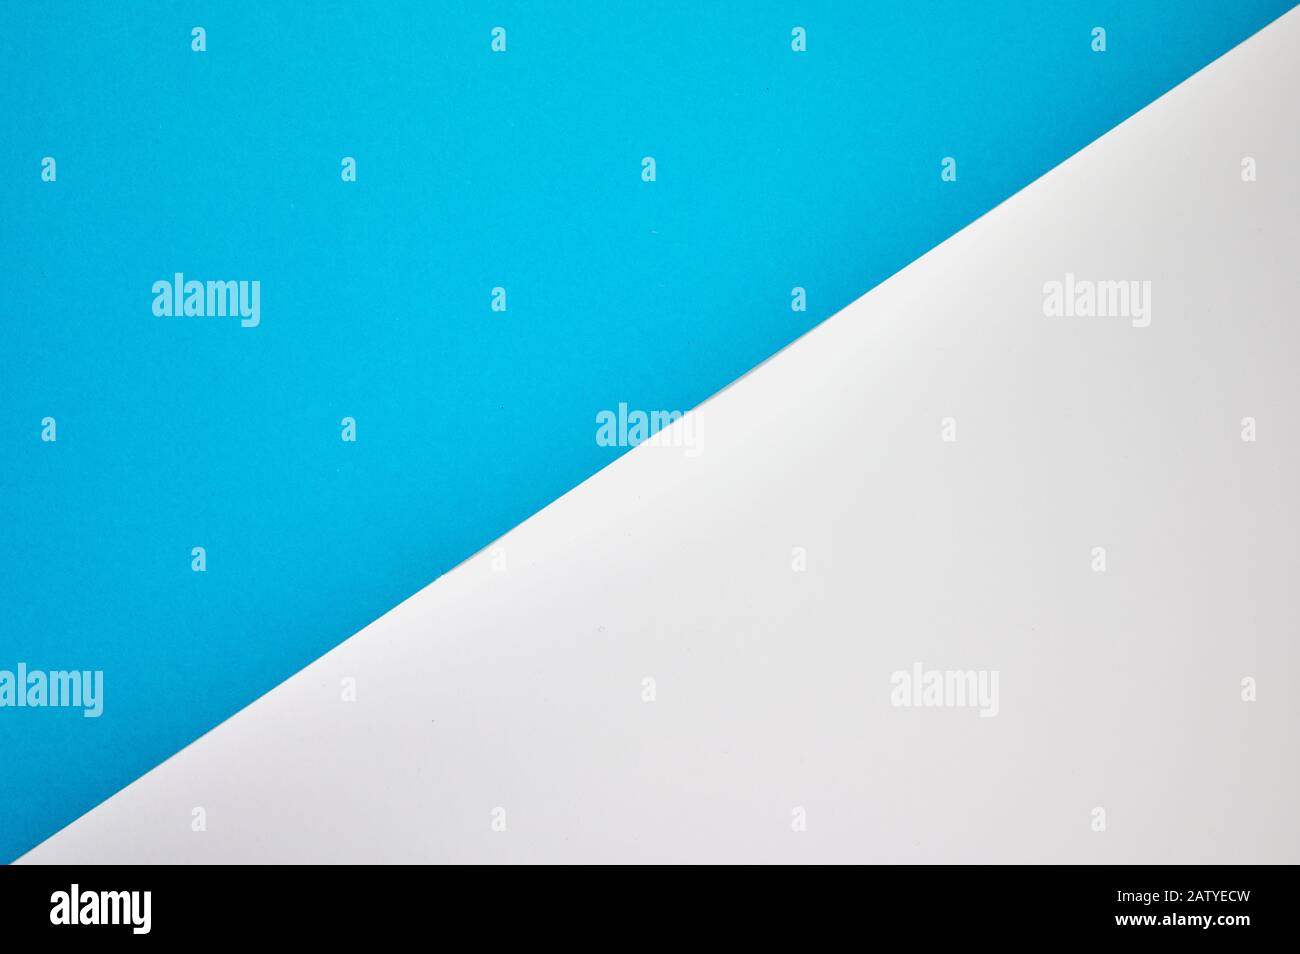 diagonal laid colored paper in blue and white as background photo with copyspace Stock Photo